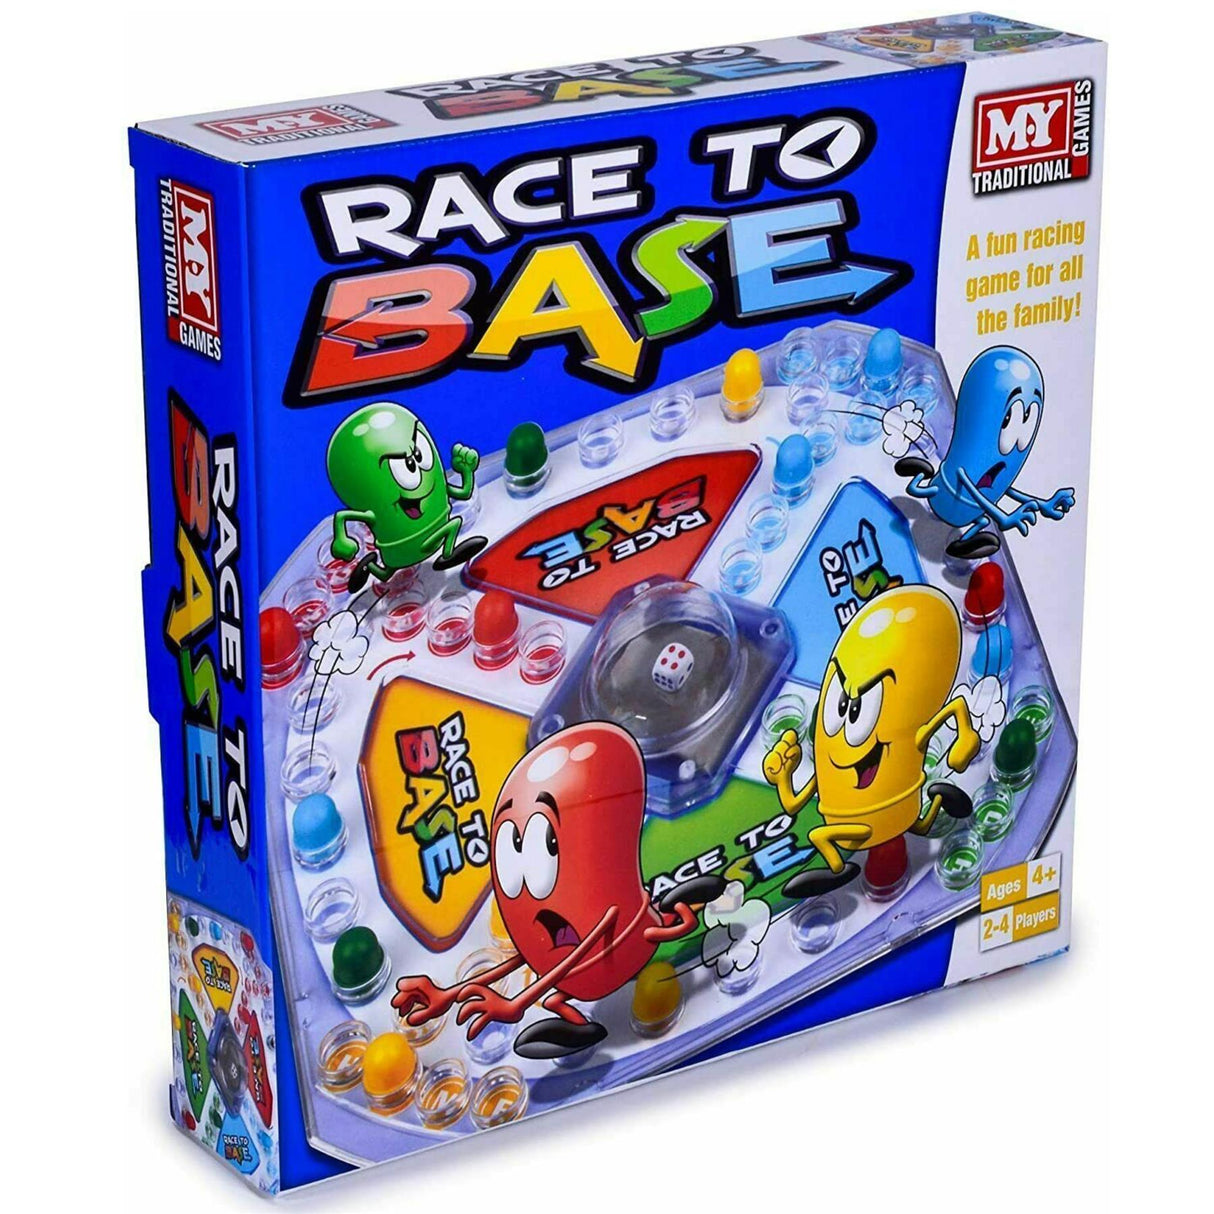 Race To Base Kids Board Game by The Magic Toy Shop - UKBuyZone